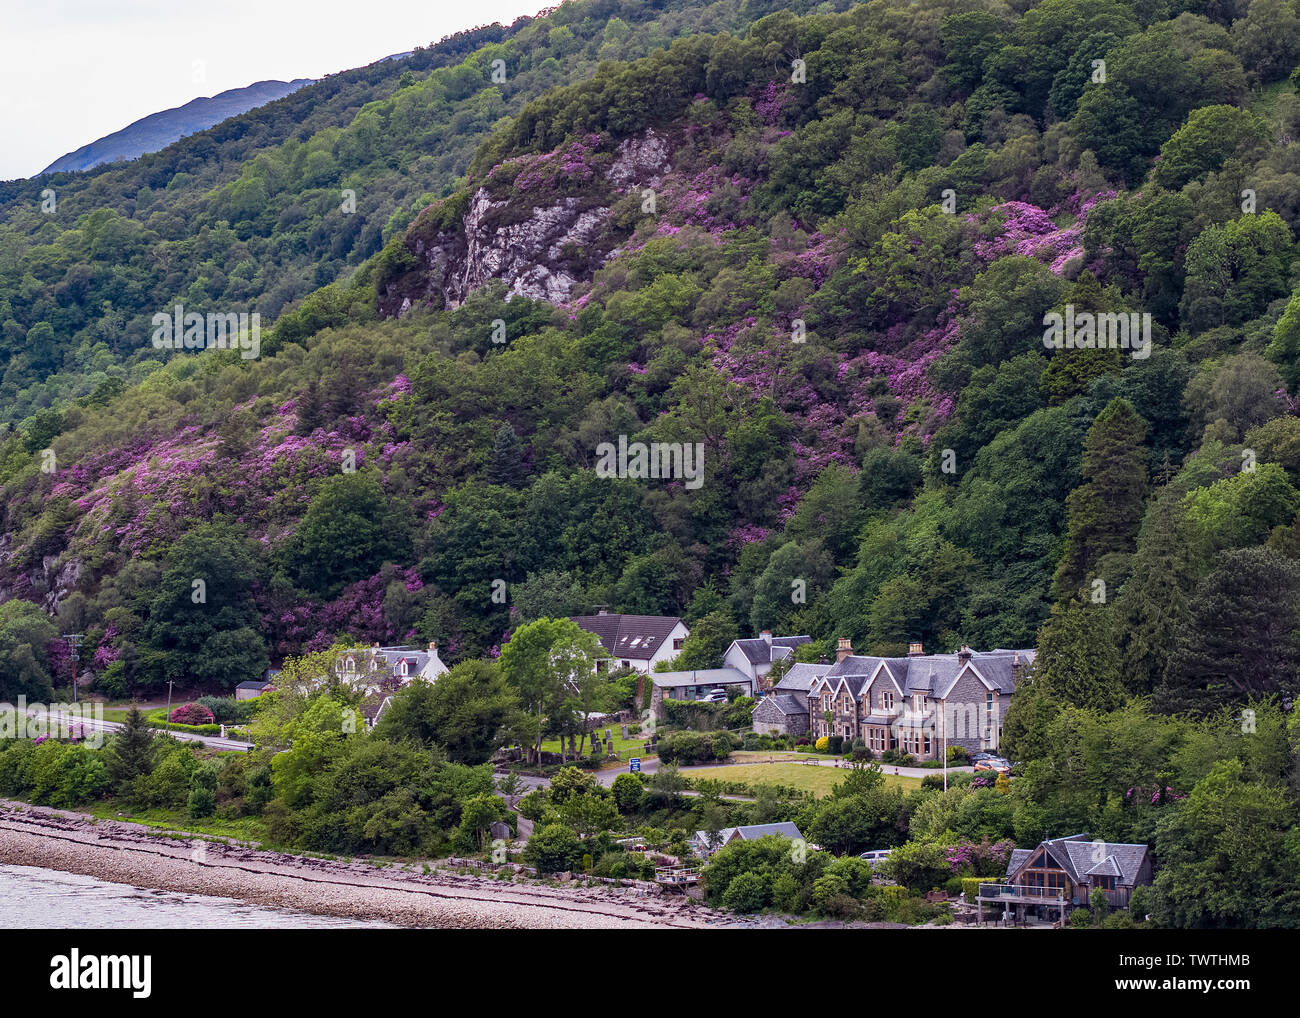 Rhododendrons on hillside. Stock Photo